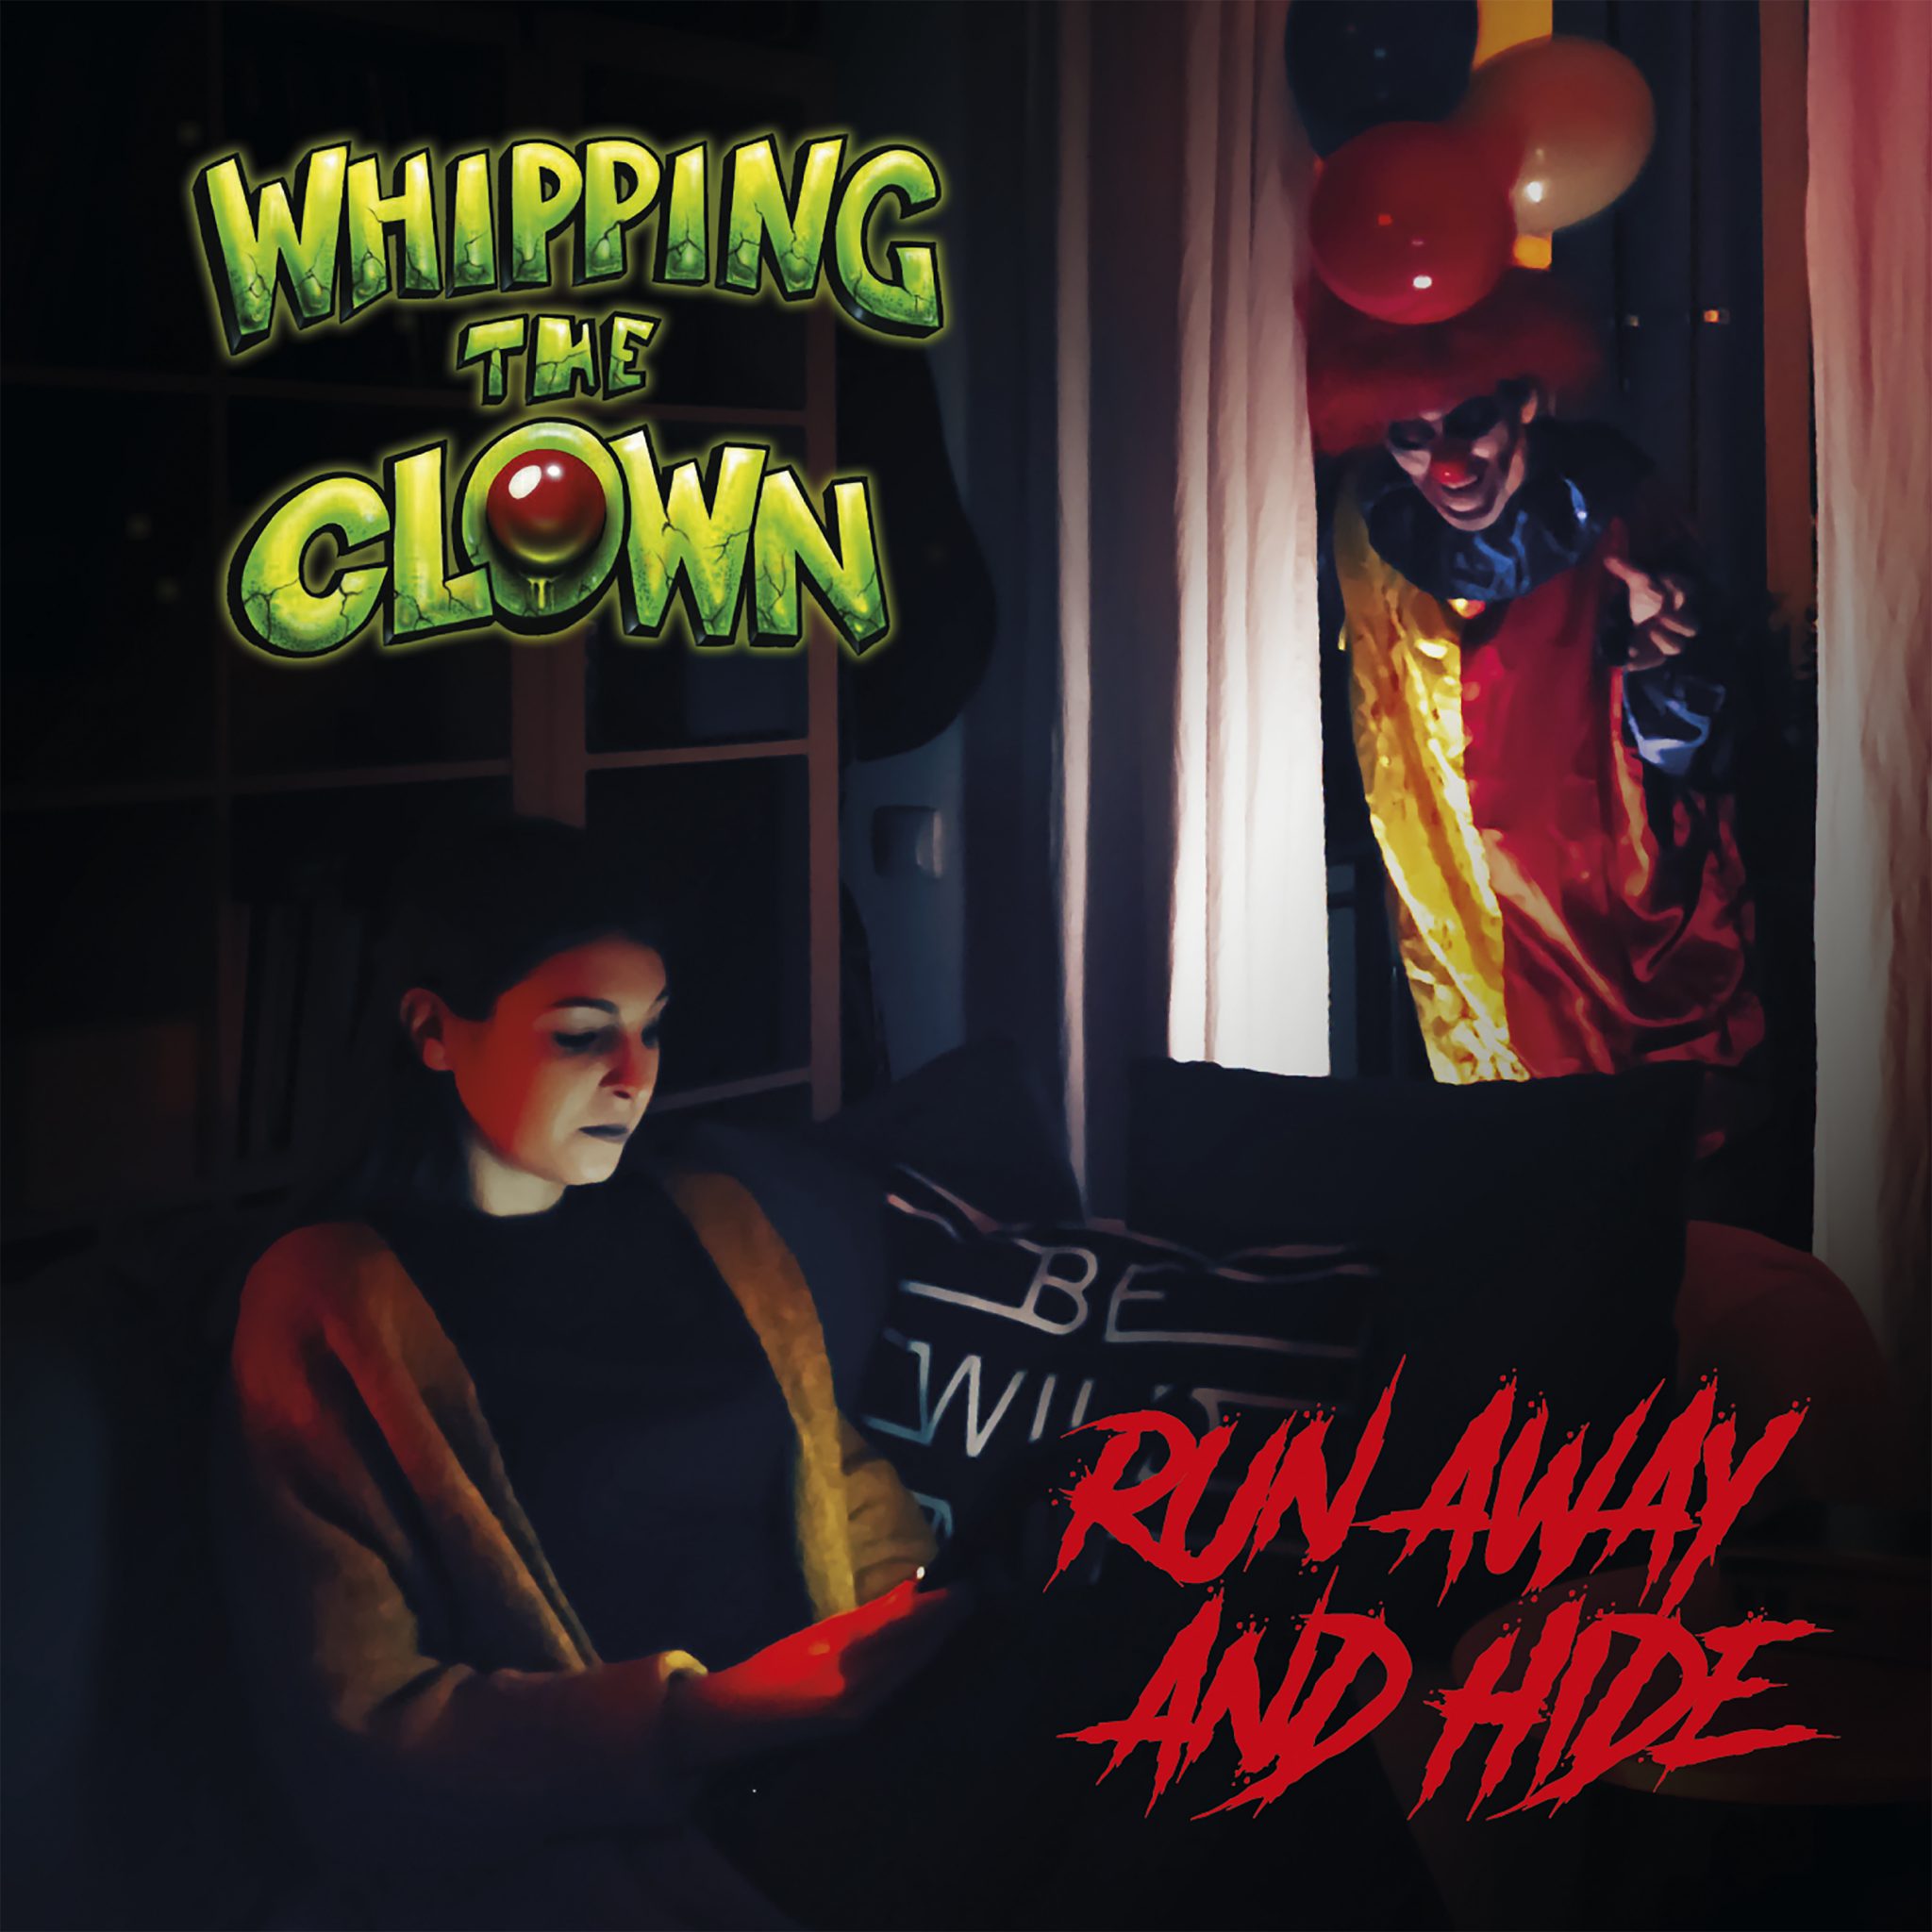 WHIPPING THE CLOWN – Run away and hide